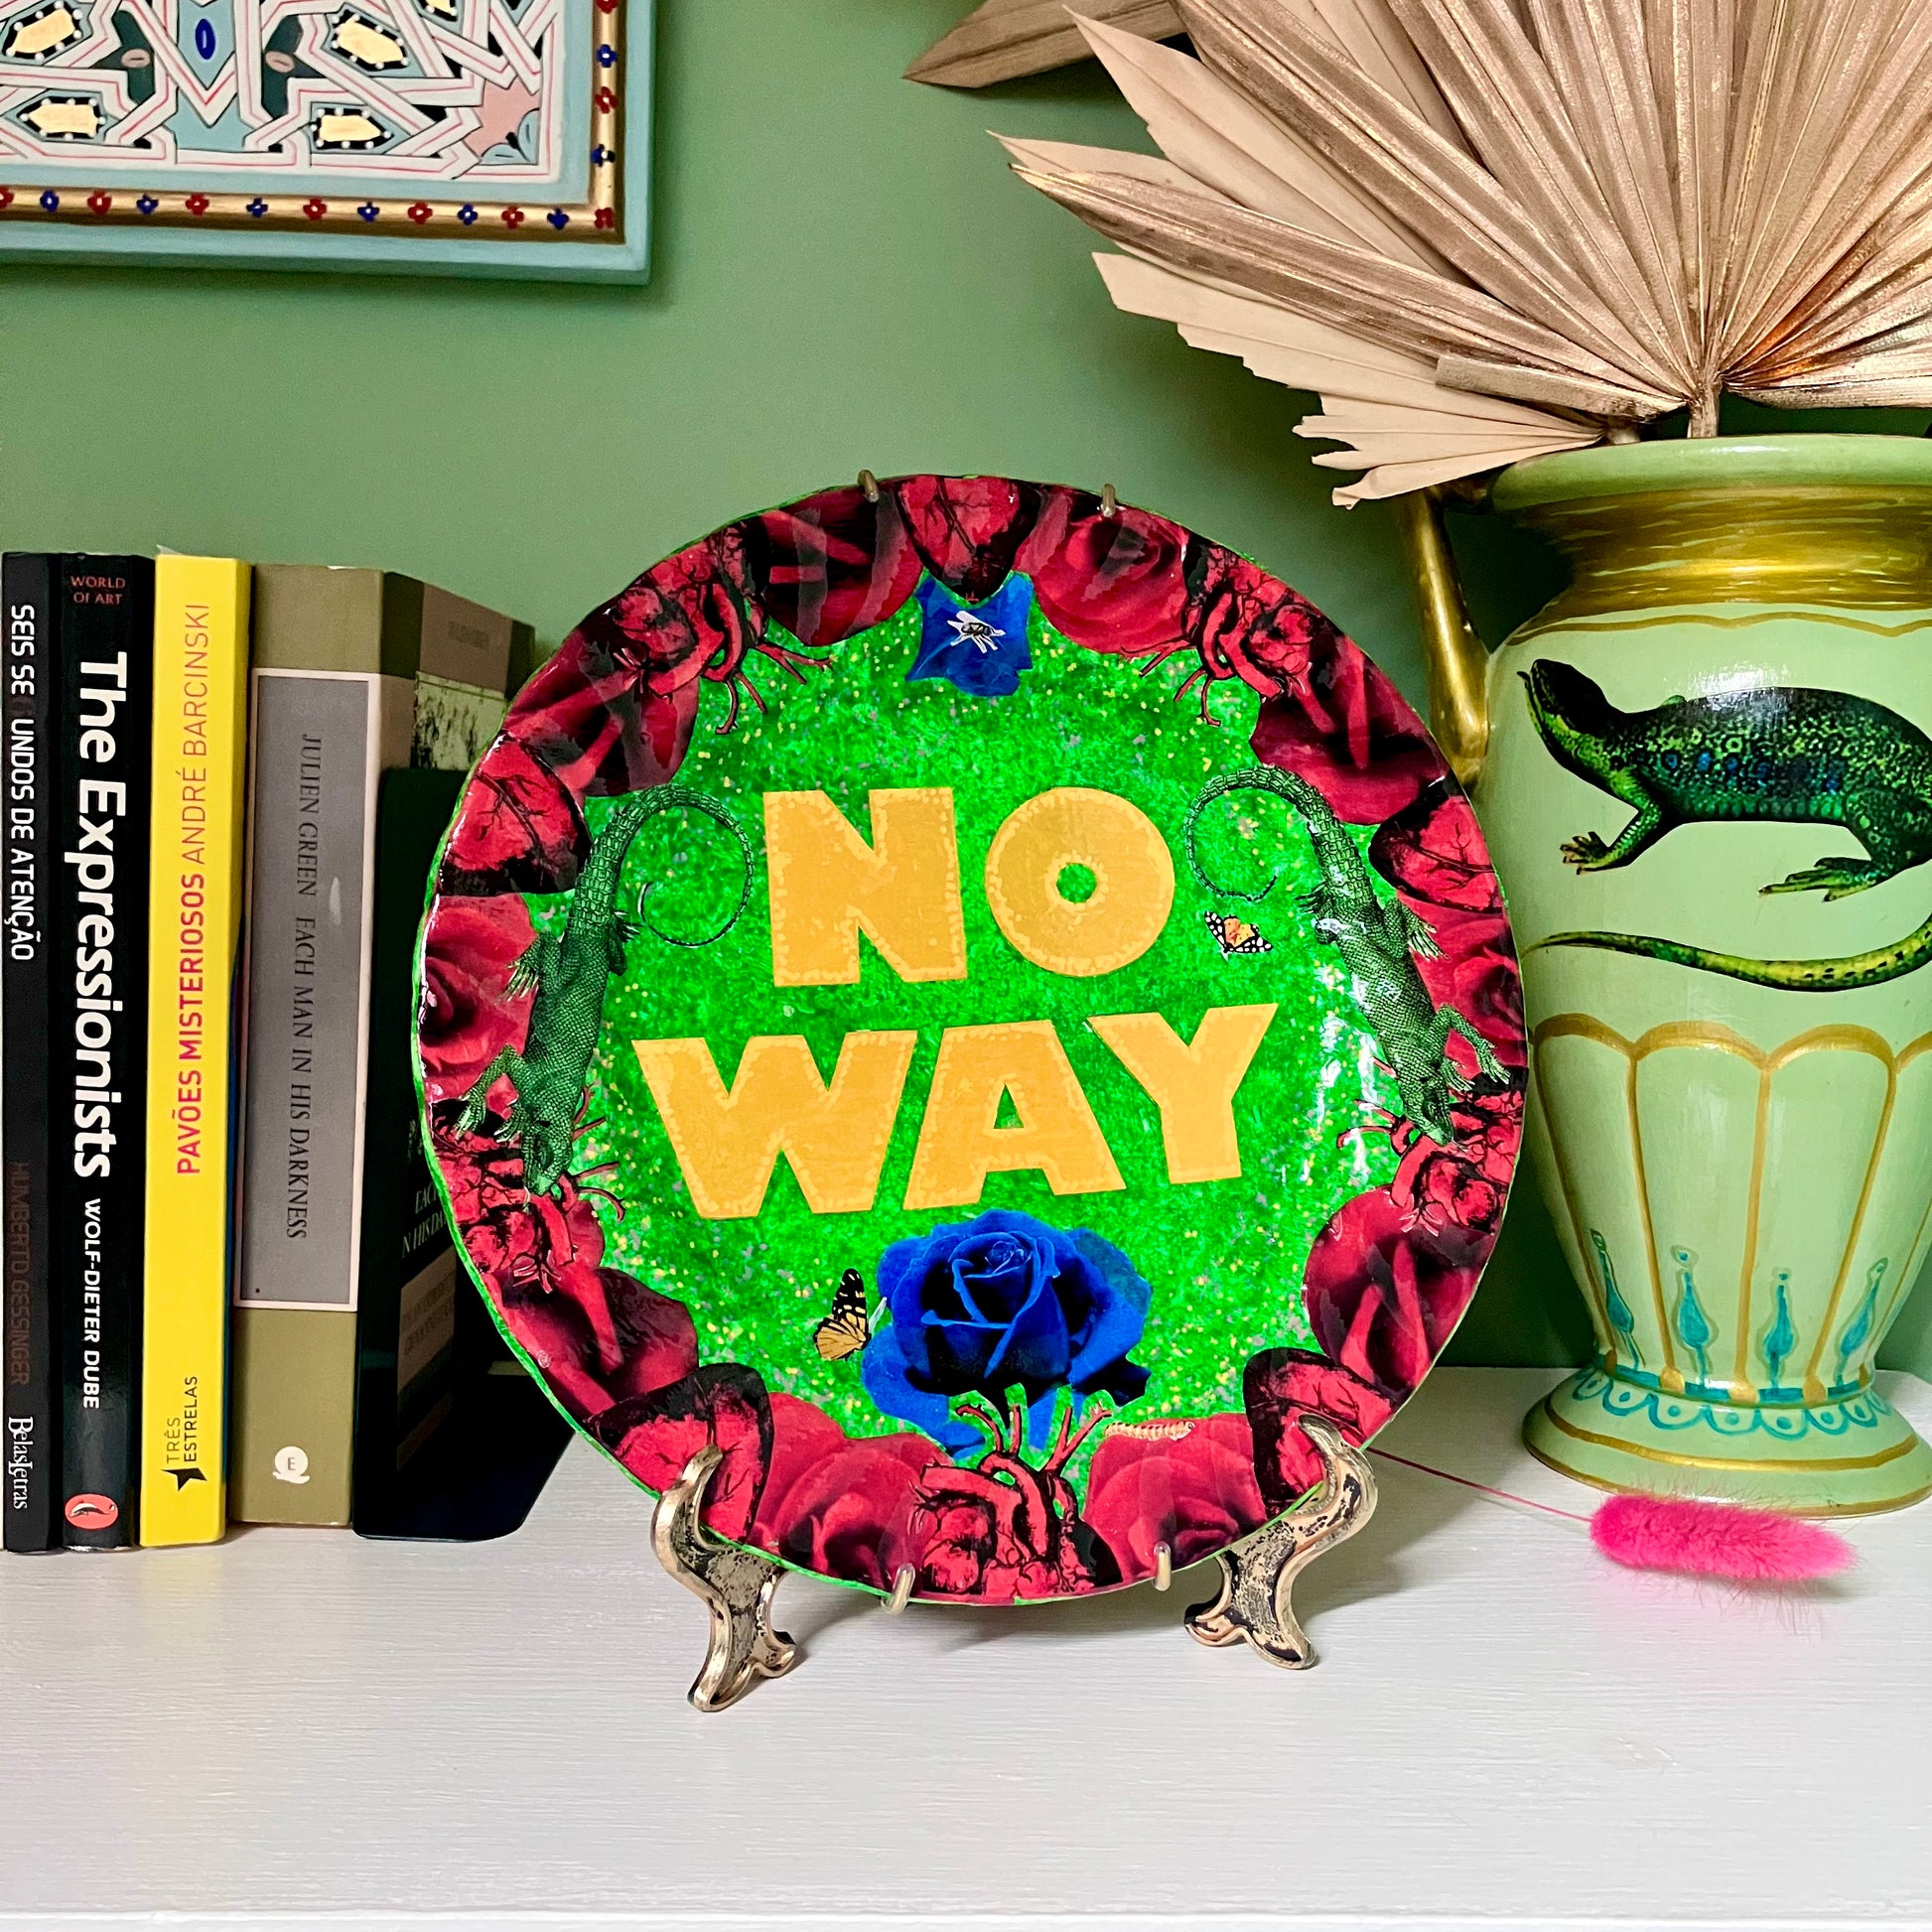 "No Way" one-of-a-kind collage artwork on upcycled wall plate by House of Frisson. Featuring the words "No Way" framed with a collage of roses, and lizards, on a green background. Lifestyle image showing plate on a plate stand resting on a shelf.